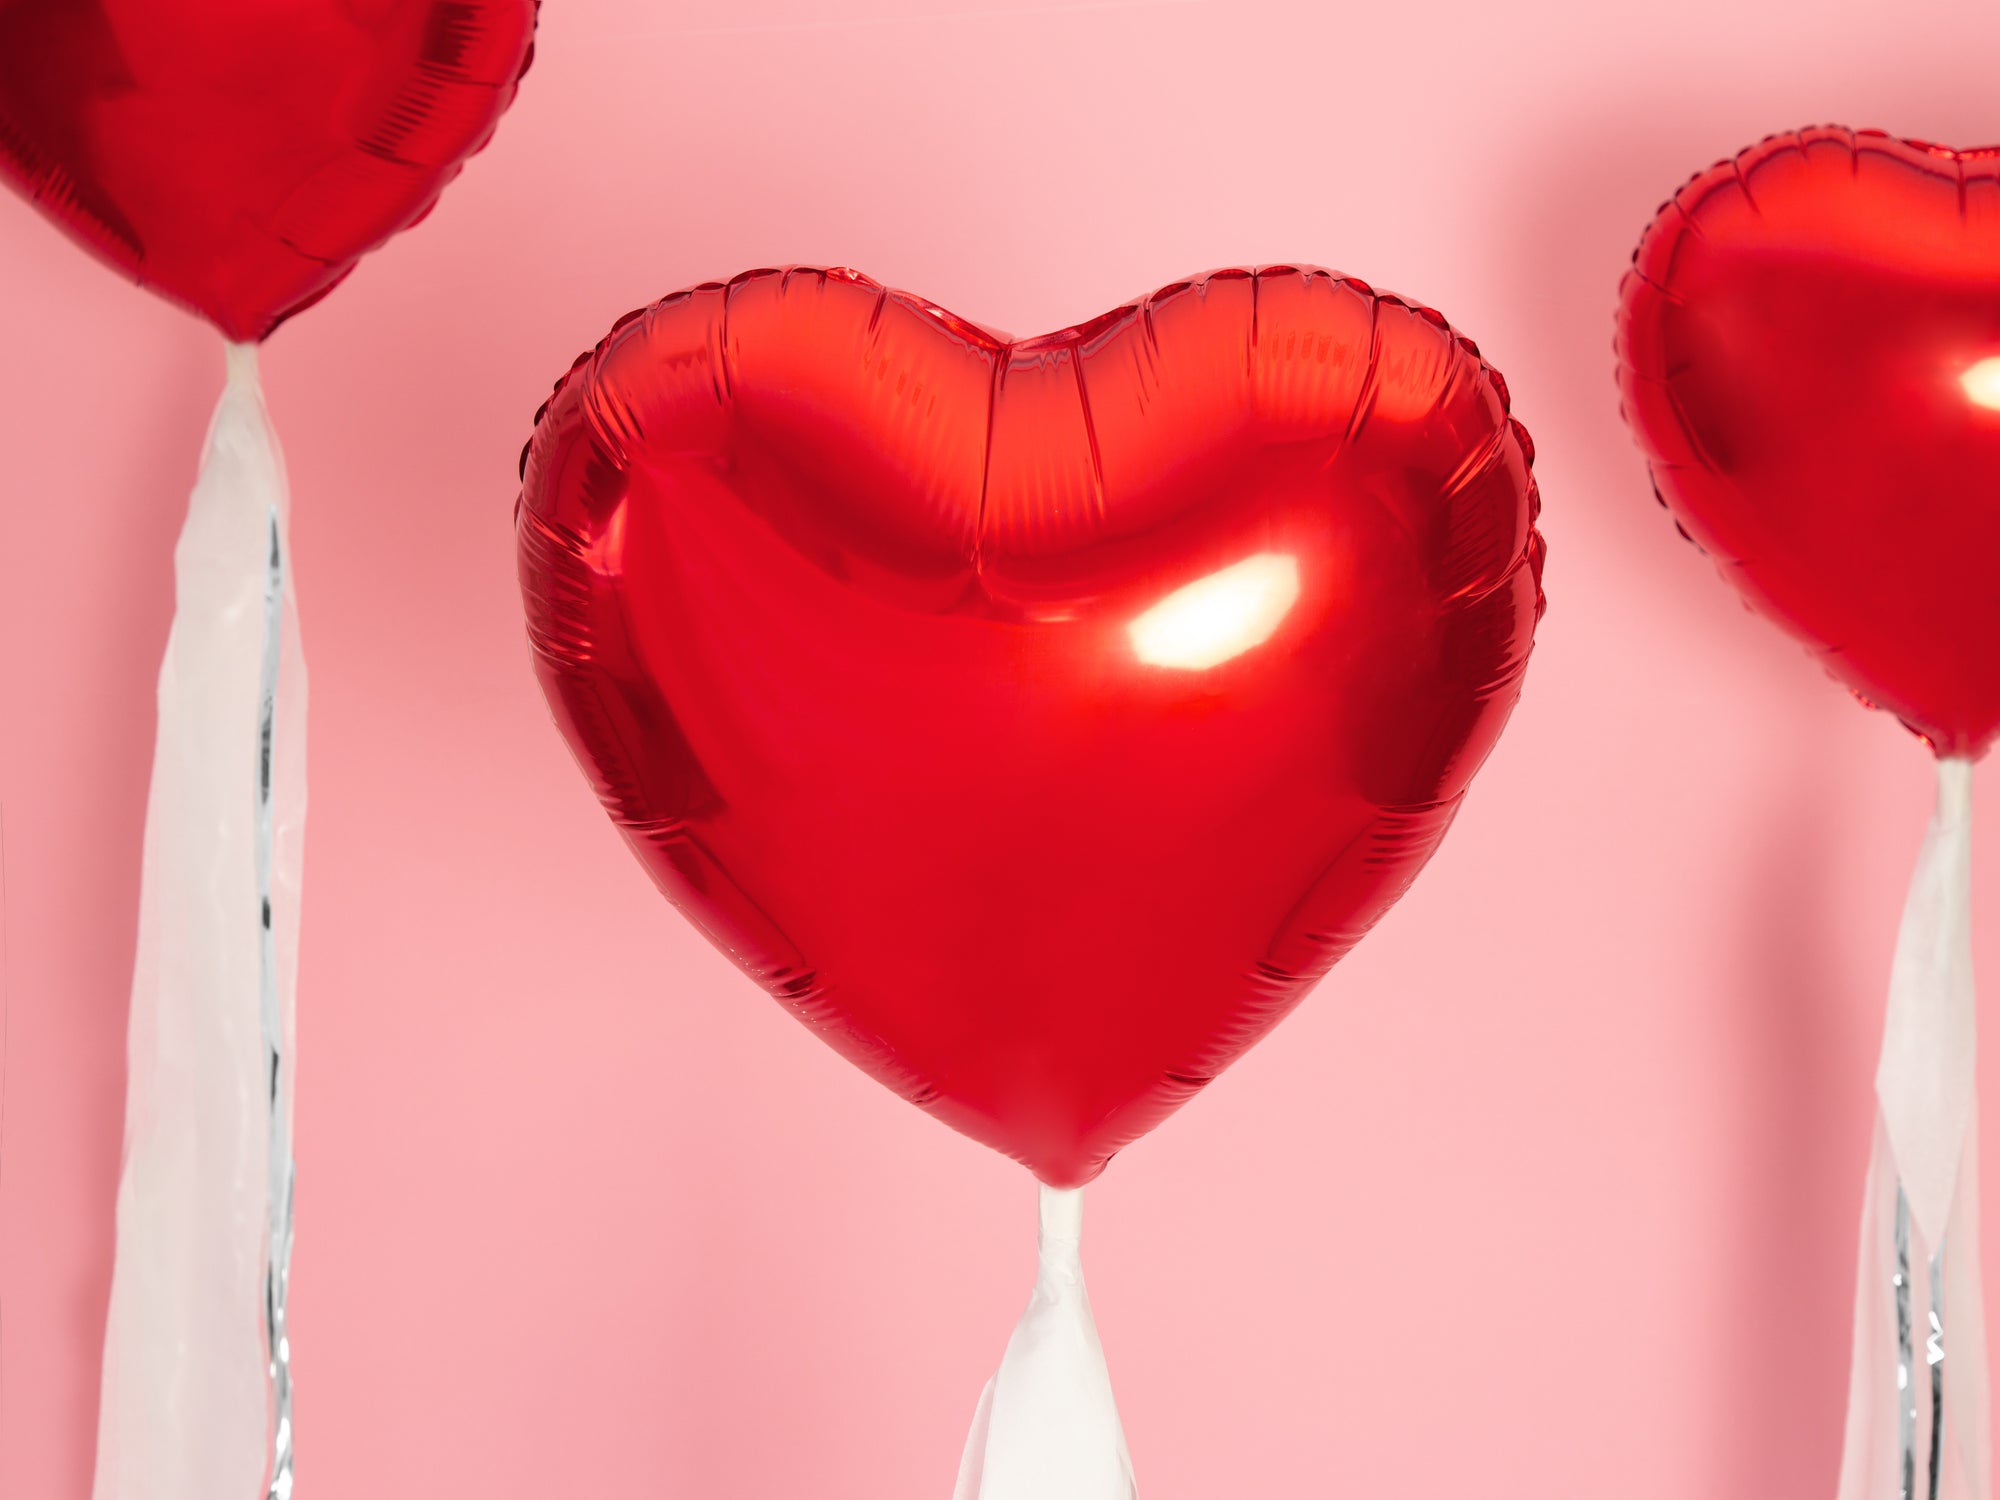 Metallic Red Heart Foil Balloon 18in | The Party Darling